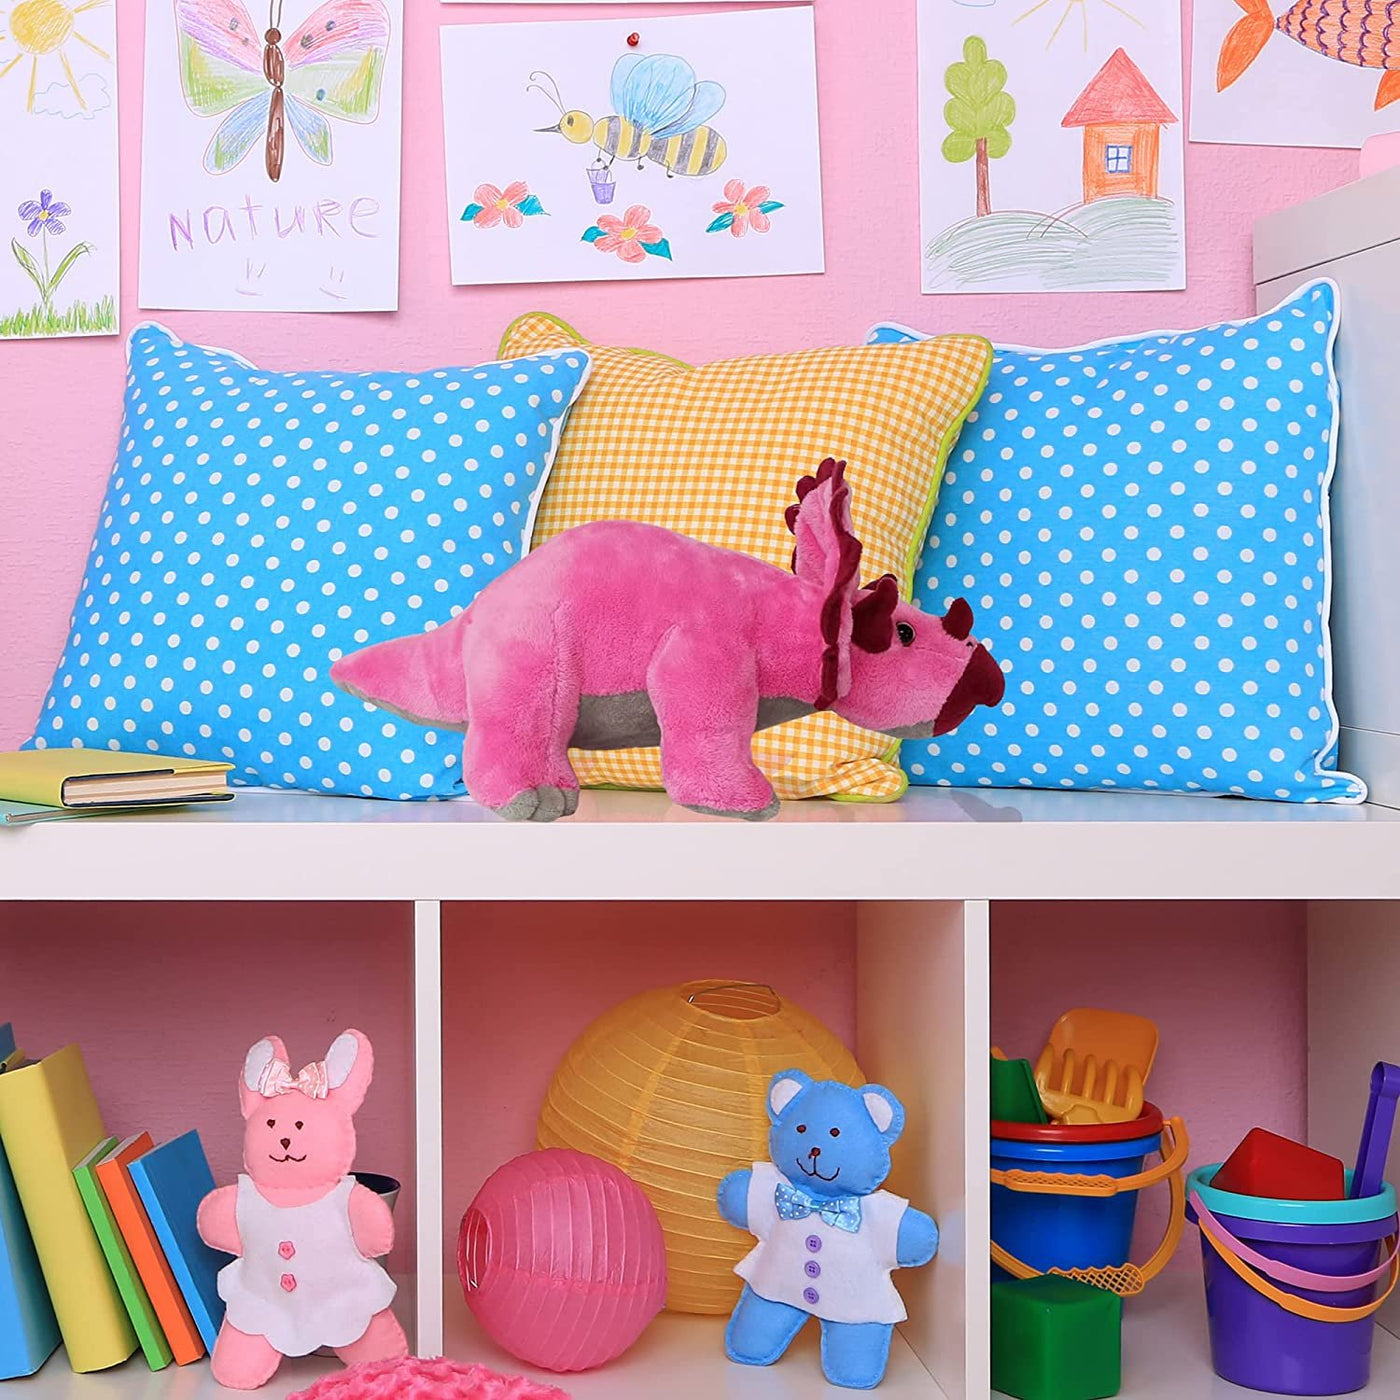 ArtCreativity Cozy Plush Triceratops Dinosaur, Soft and Cuddly Stuffed Animal for Kids, Unique Dinosaur Room Decoration, Great Gift Idea for Boys and Girls